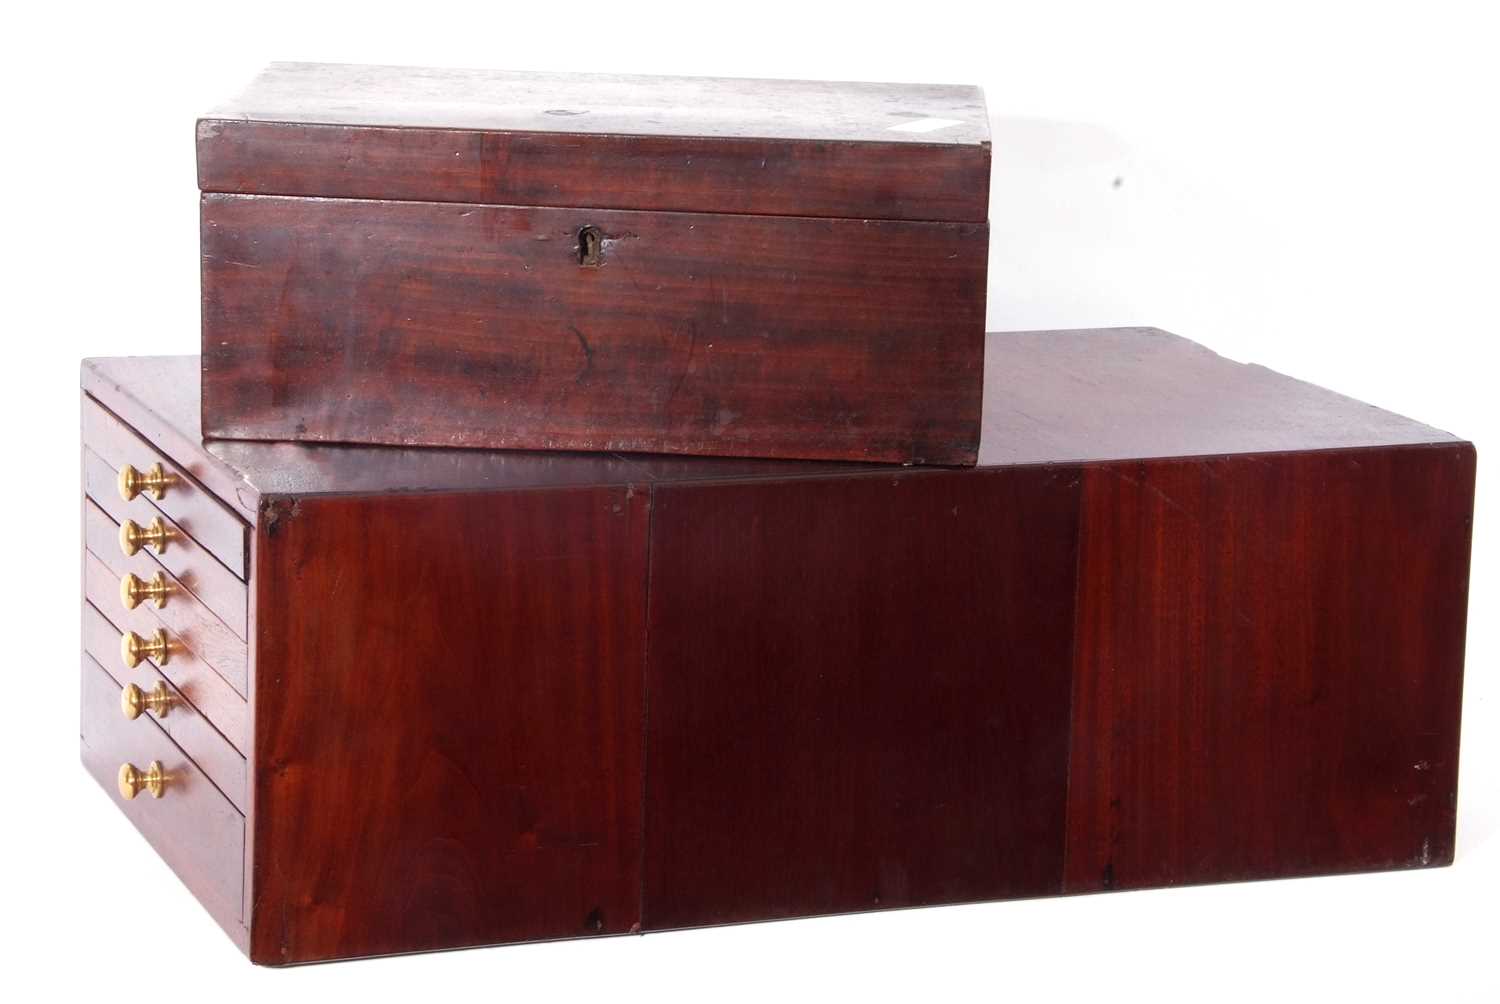 Six drawer mahogany cabinet together with a mahogany box, both with a small quantity of various